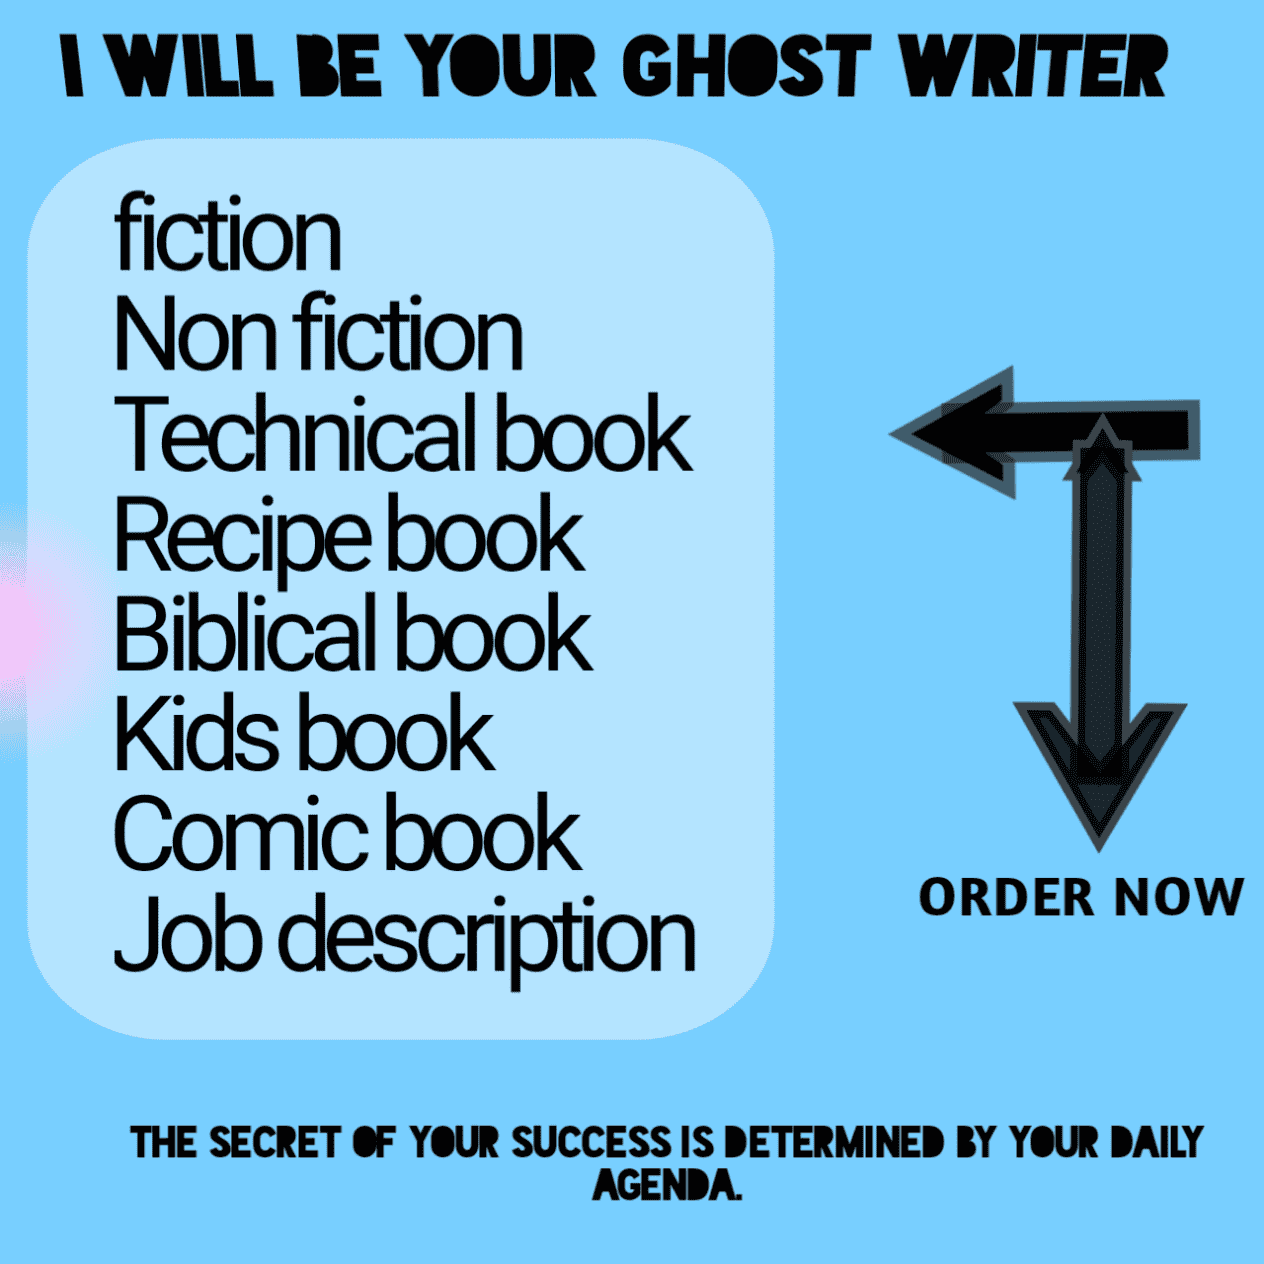 I will be your ghost writer